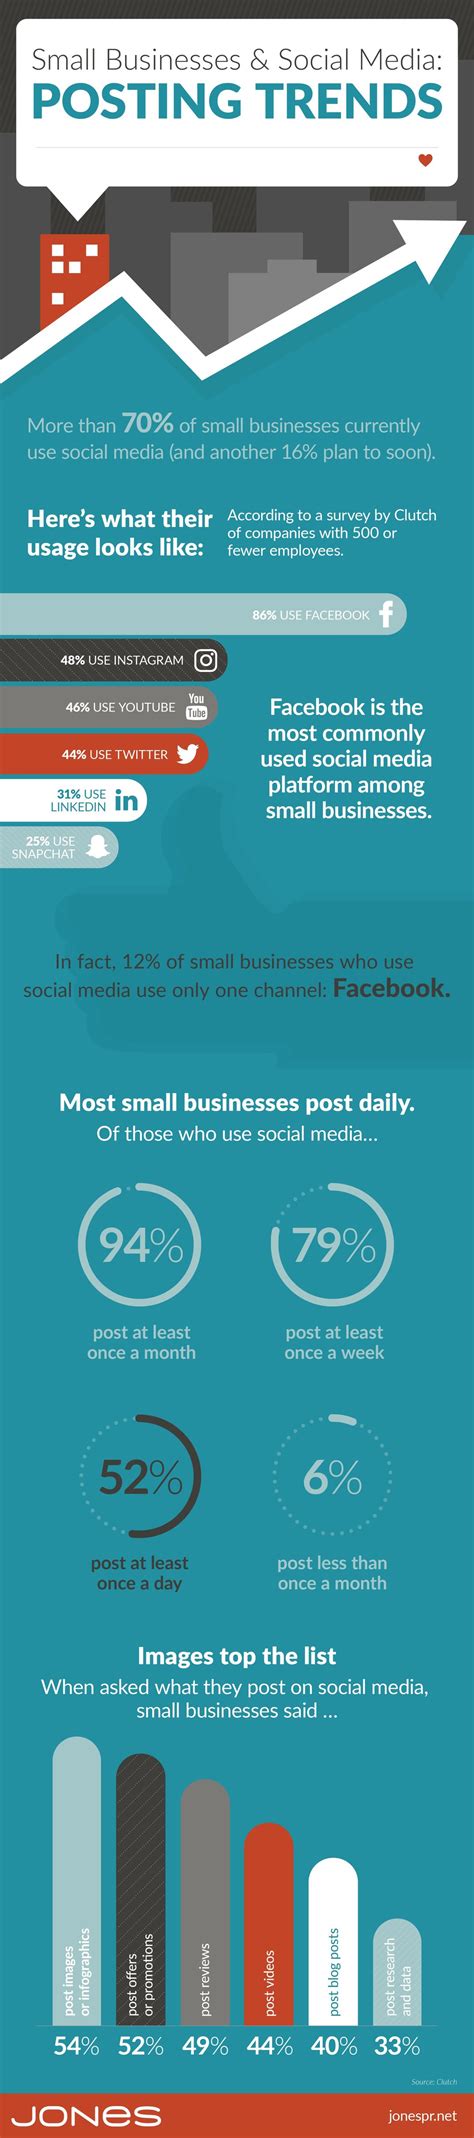 Small Business And Social Media 2018 Posting Trends Infographic